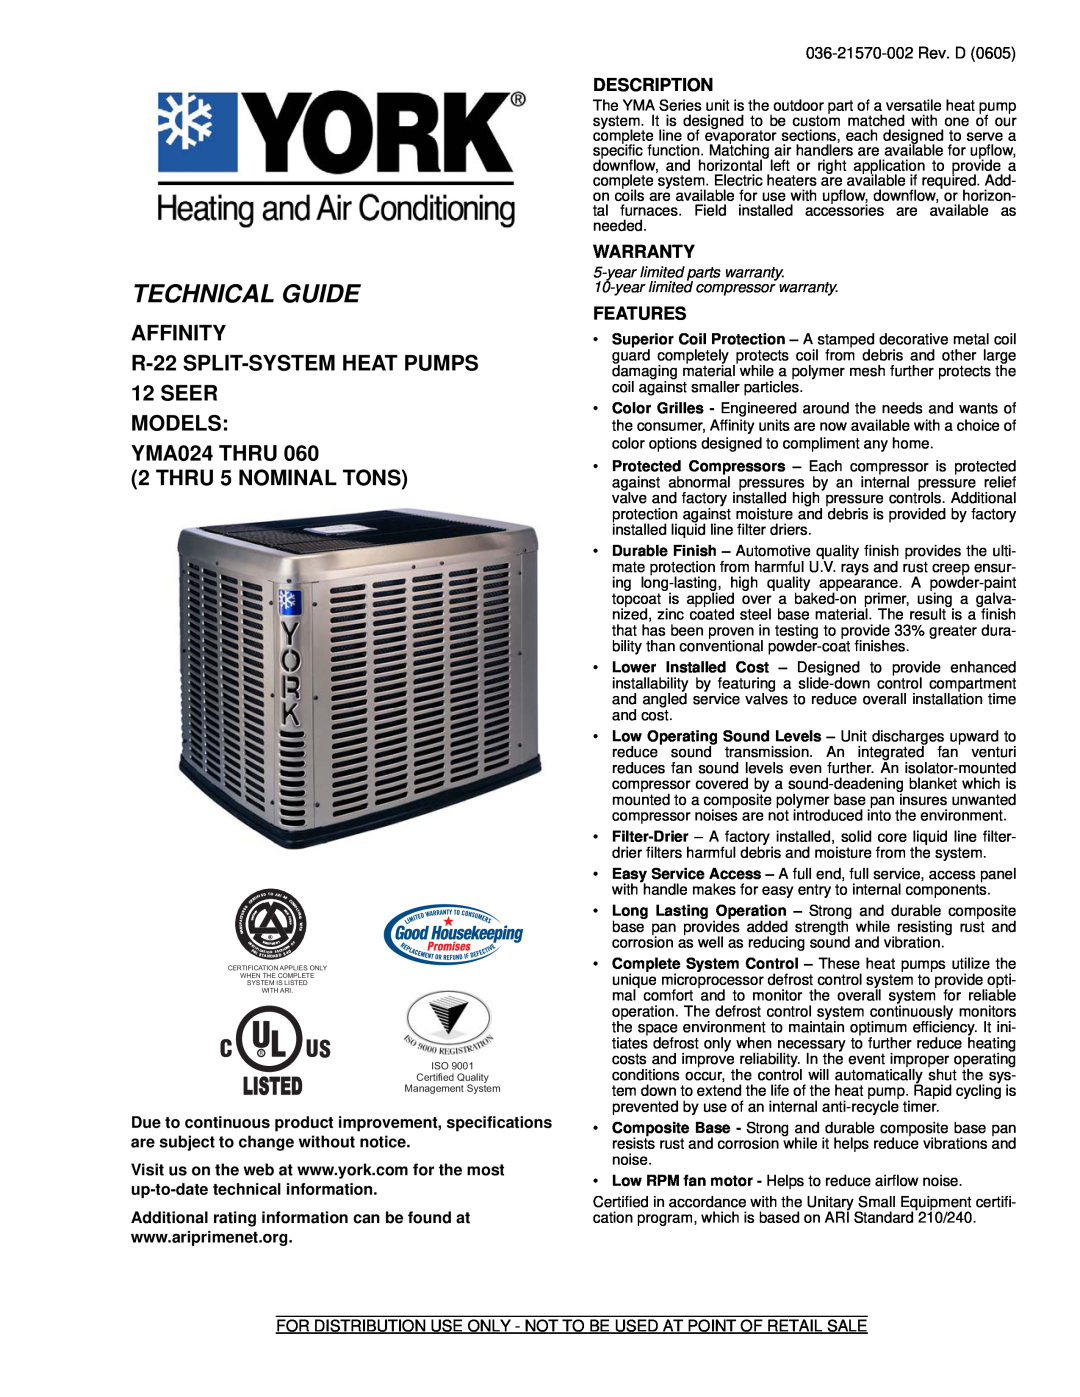 York YMA024 warranty Description, Warranty, Features, Technical Guide, Listed, AFFINITY R-22 SPLIT-SYSTEMHEAT PUMPS 